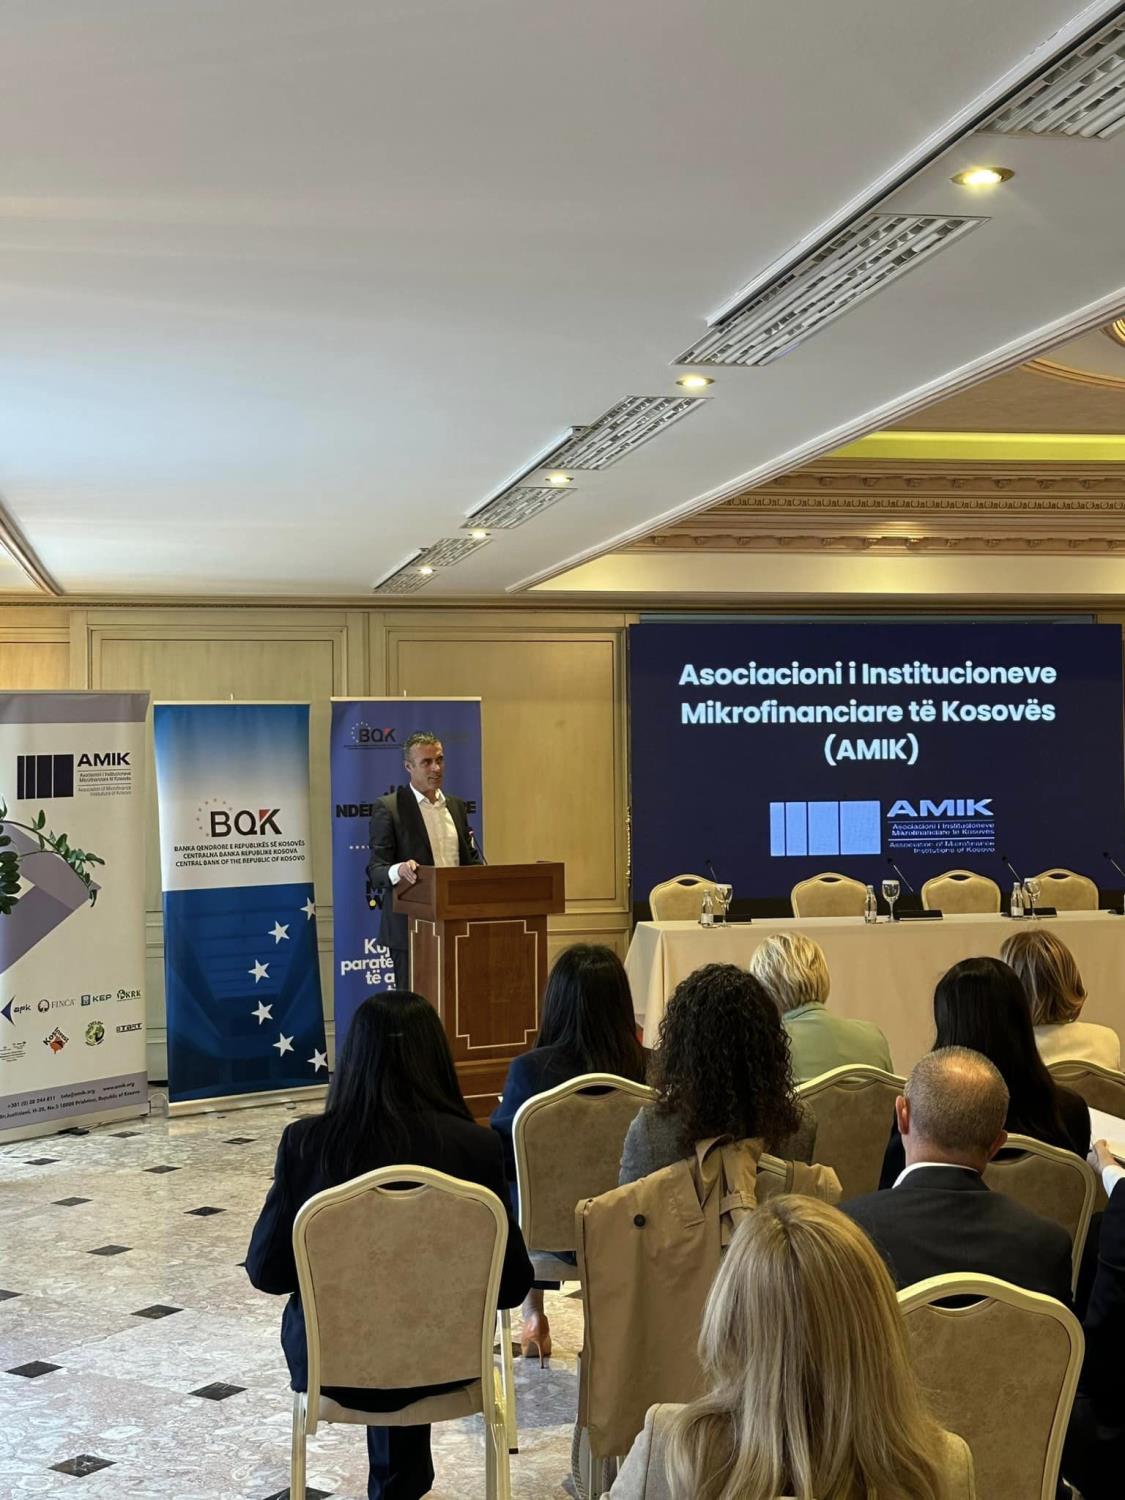 The conference "Access to Finance for Women Entrepreneurs" is held, co-organized by the Central Bank of the Republic of Kosovo and AMIK